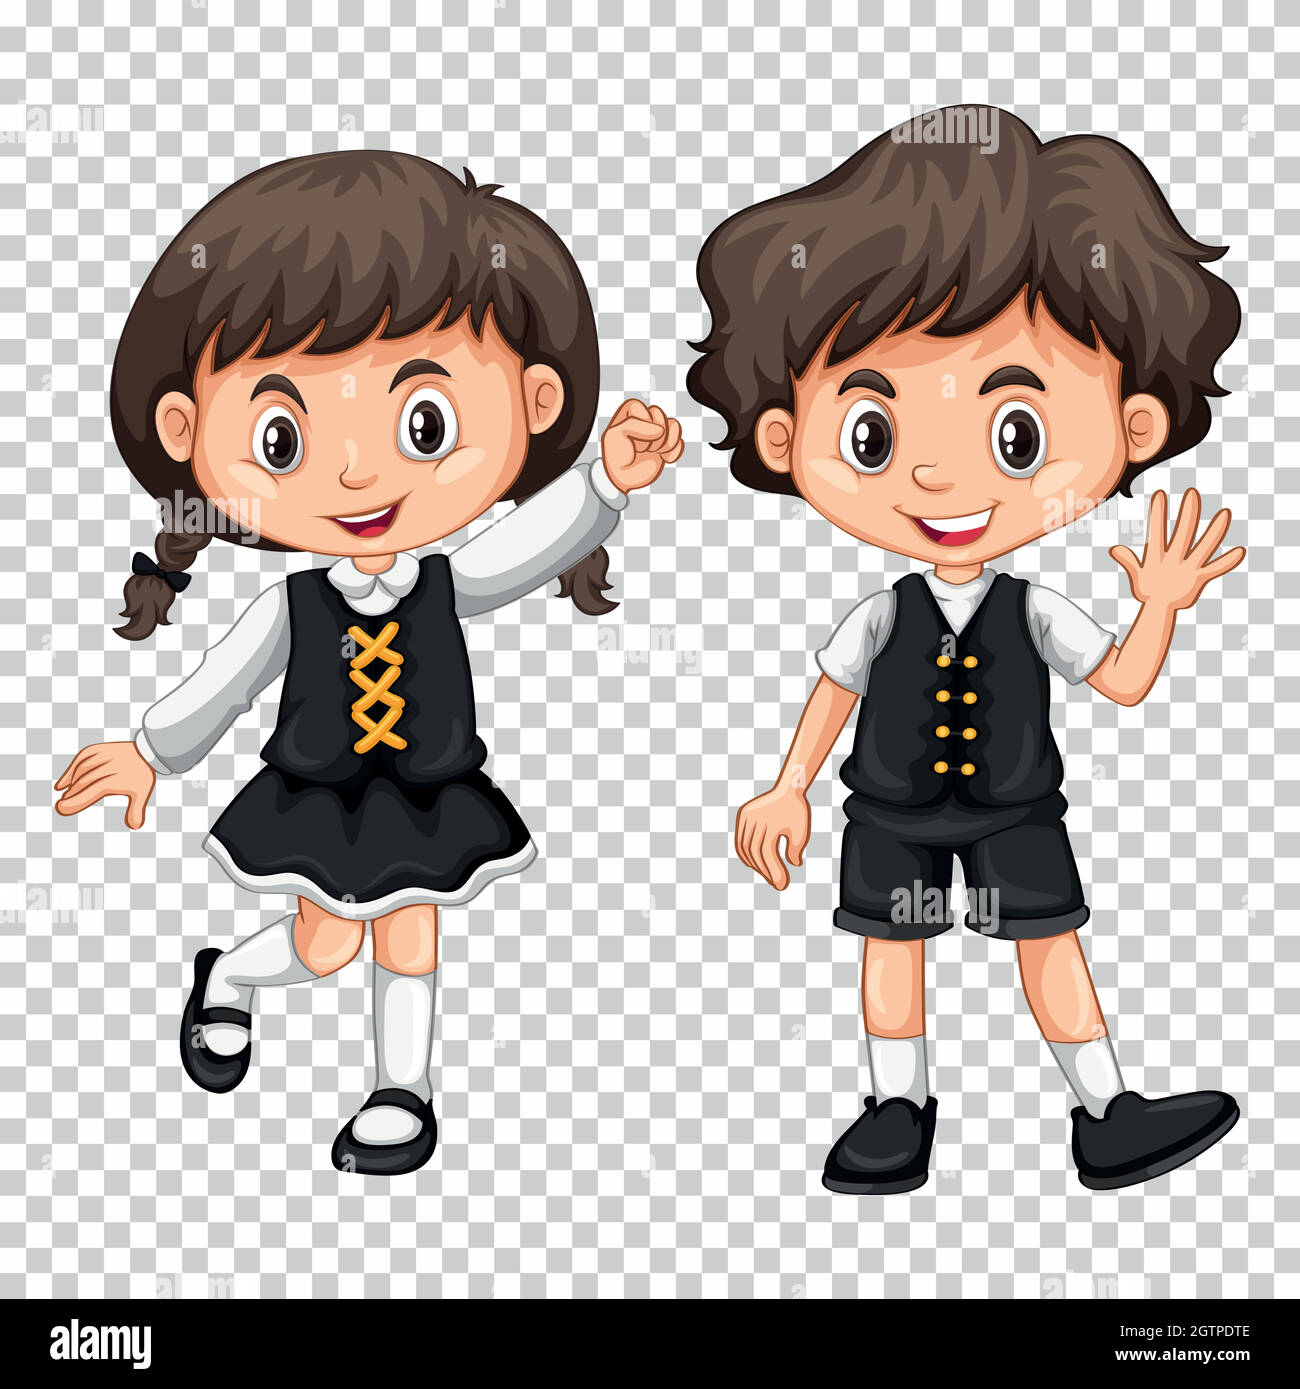 Boy and girl with black hair Stock Vector